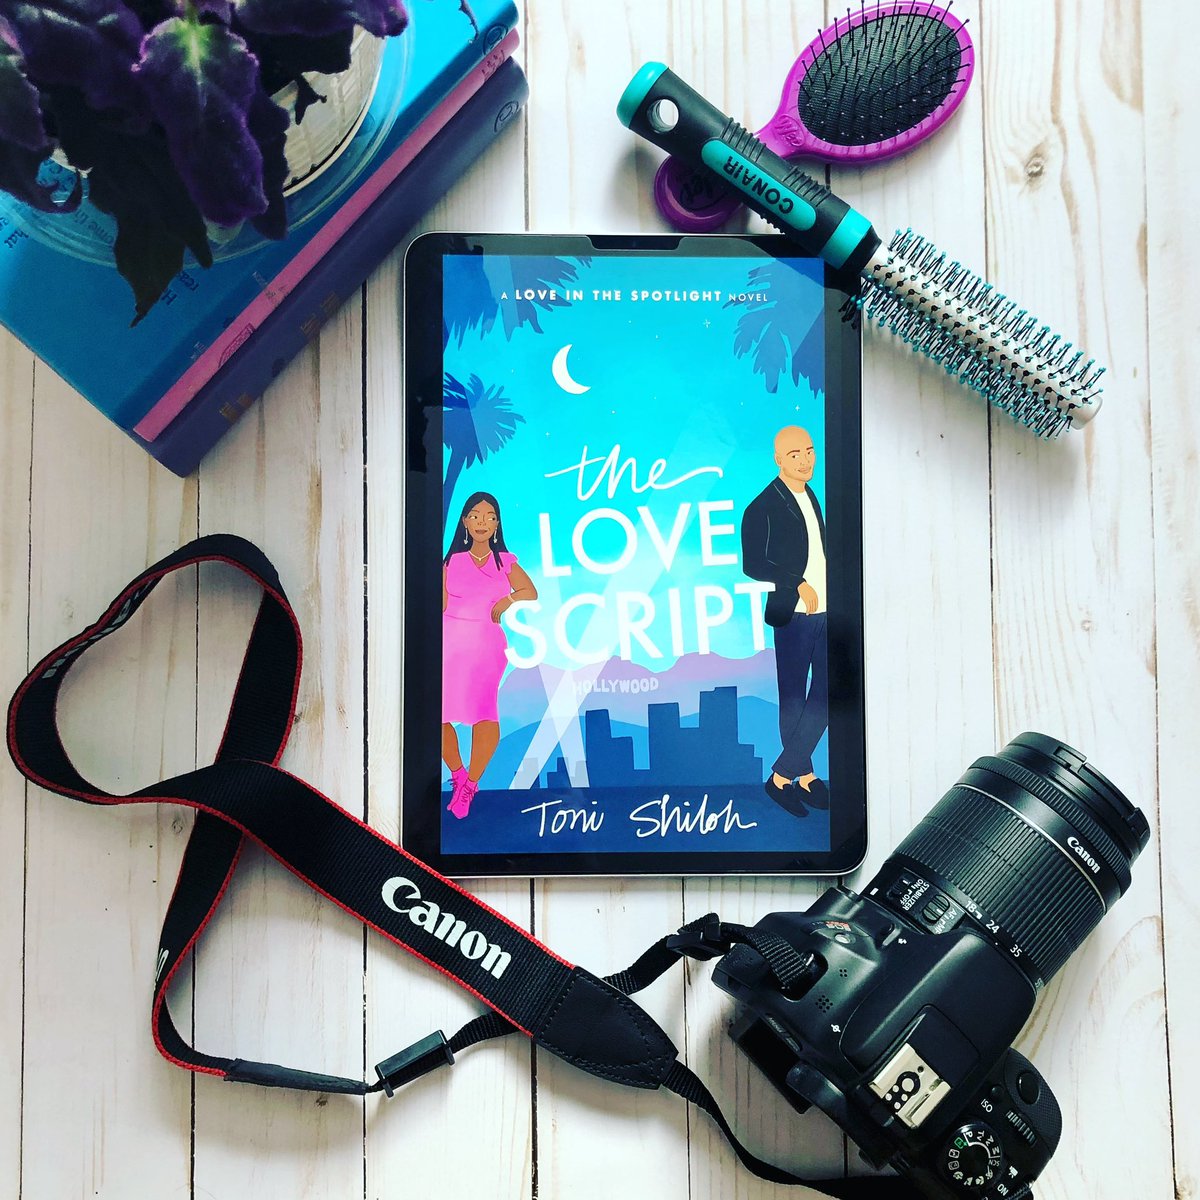 Looking for a cute fake relationship romance? Give #thelovescript a try! Available here: amazon.com/Love-Script-Sp… #fivestarread #ChickLit #cleanromance #bhpfiction #loveinthespotlight #tonishiloh #MustRead #BookTwitter #christianromance #romance @tonishilohwrite @bethany_house